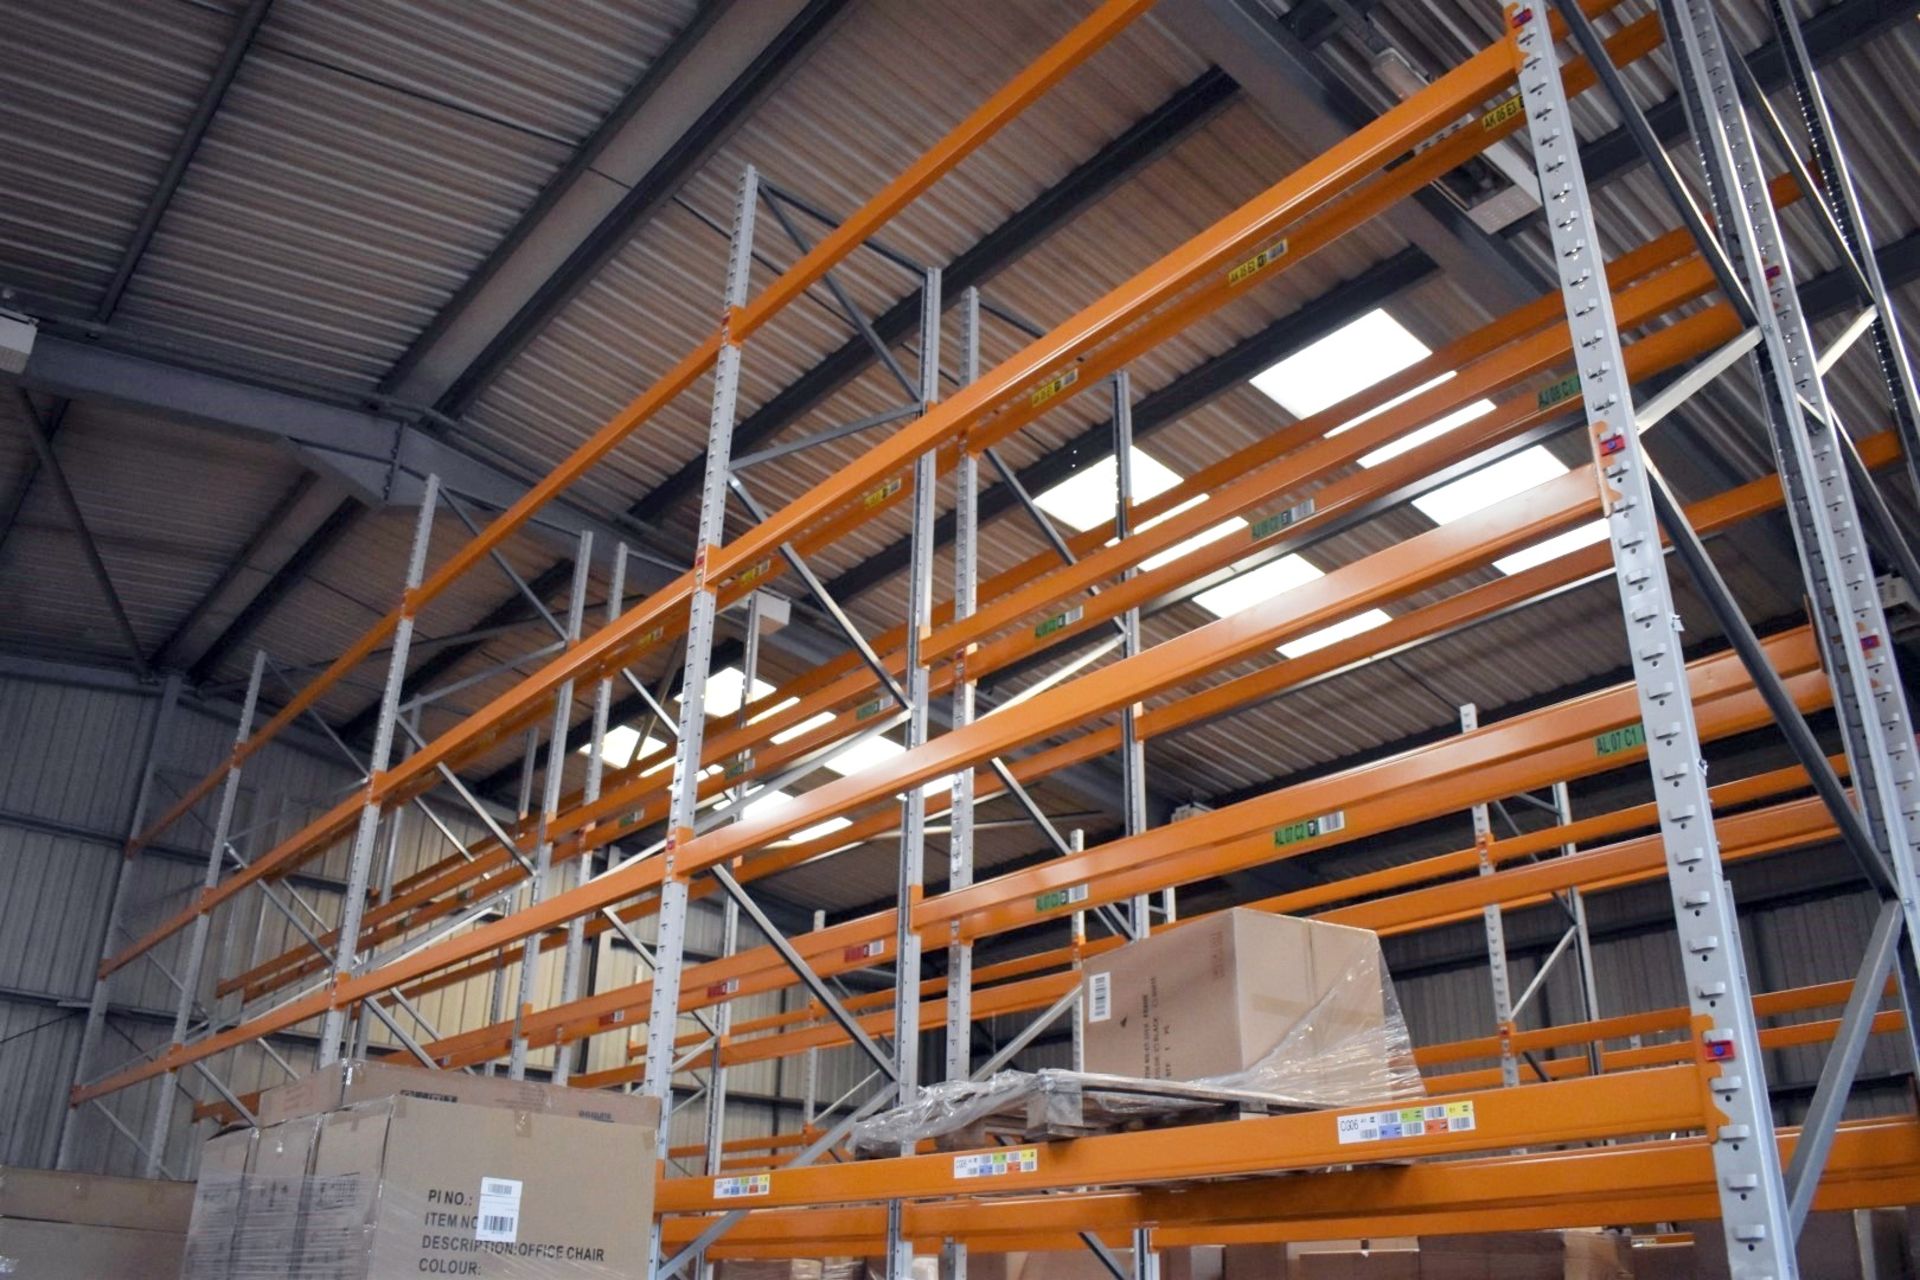 9 x Bays of Apex Pallet Racking - Includes 10 x Apex 16 UK 16,000kg Capacity Uprights and 60 x - Image 10 of 19